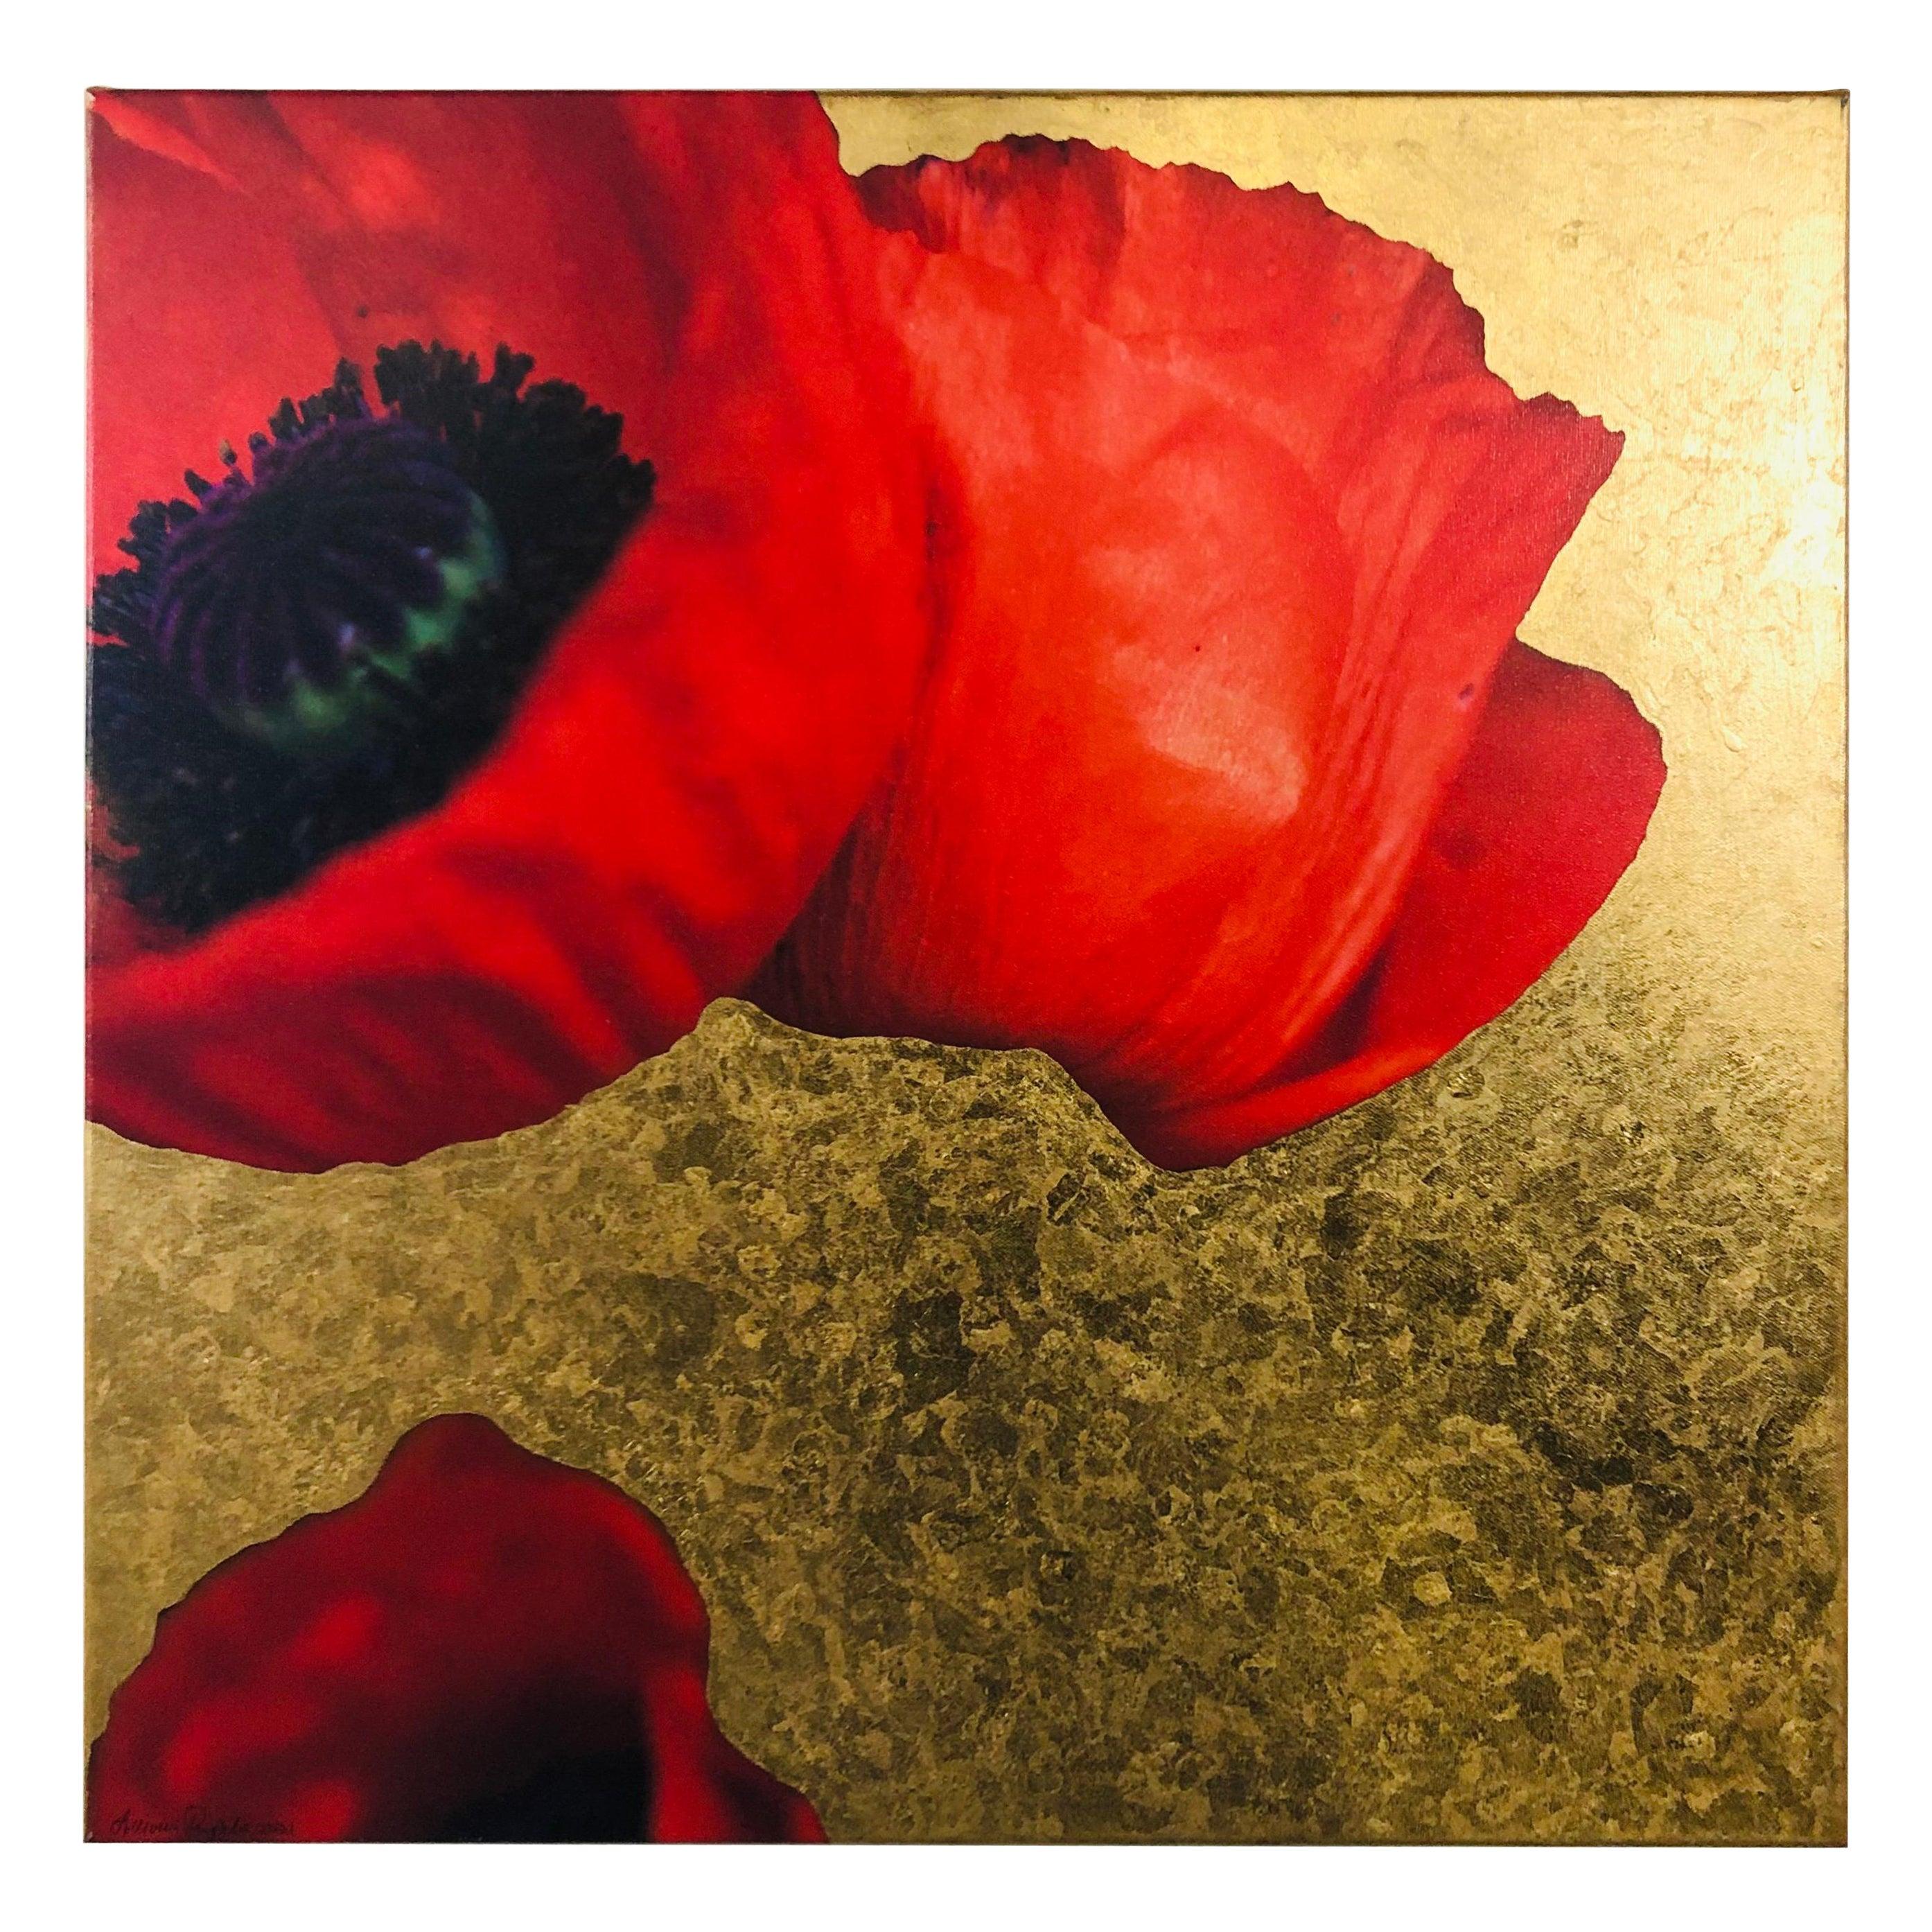 Mixed Media on Canvas Entitled " Sag Harbor Poppies" by Luciana Pampalone - Painting by Unknown